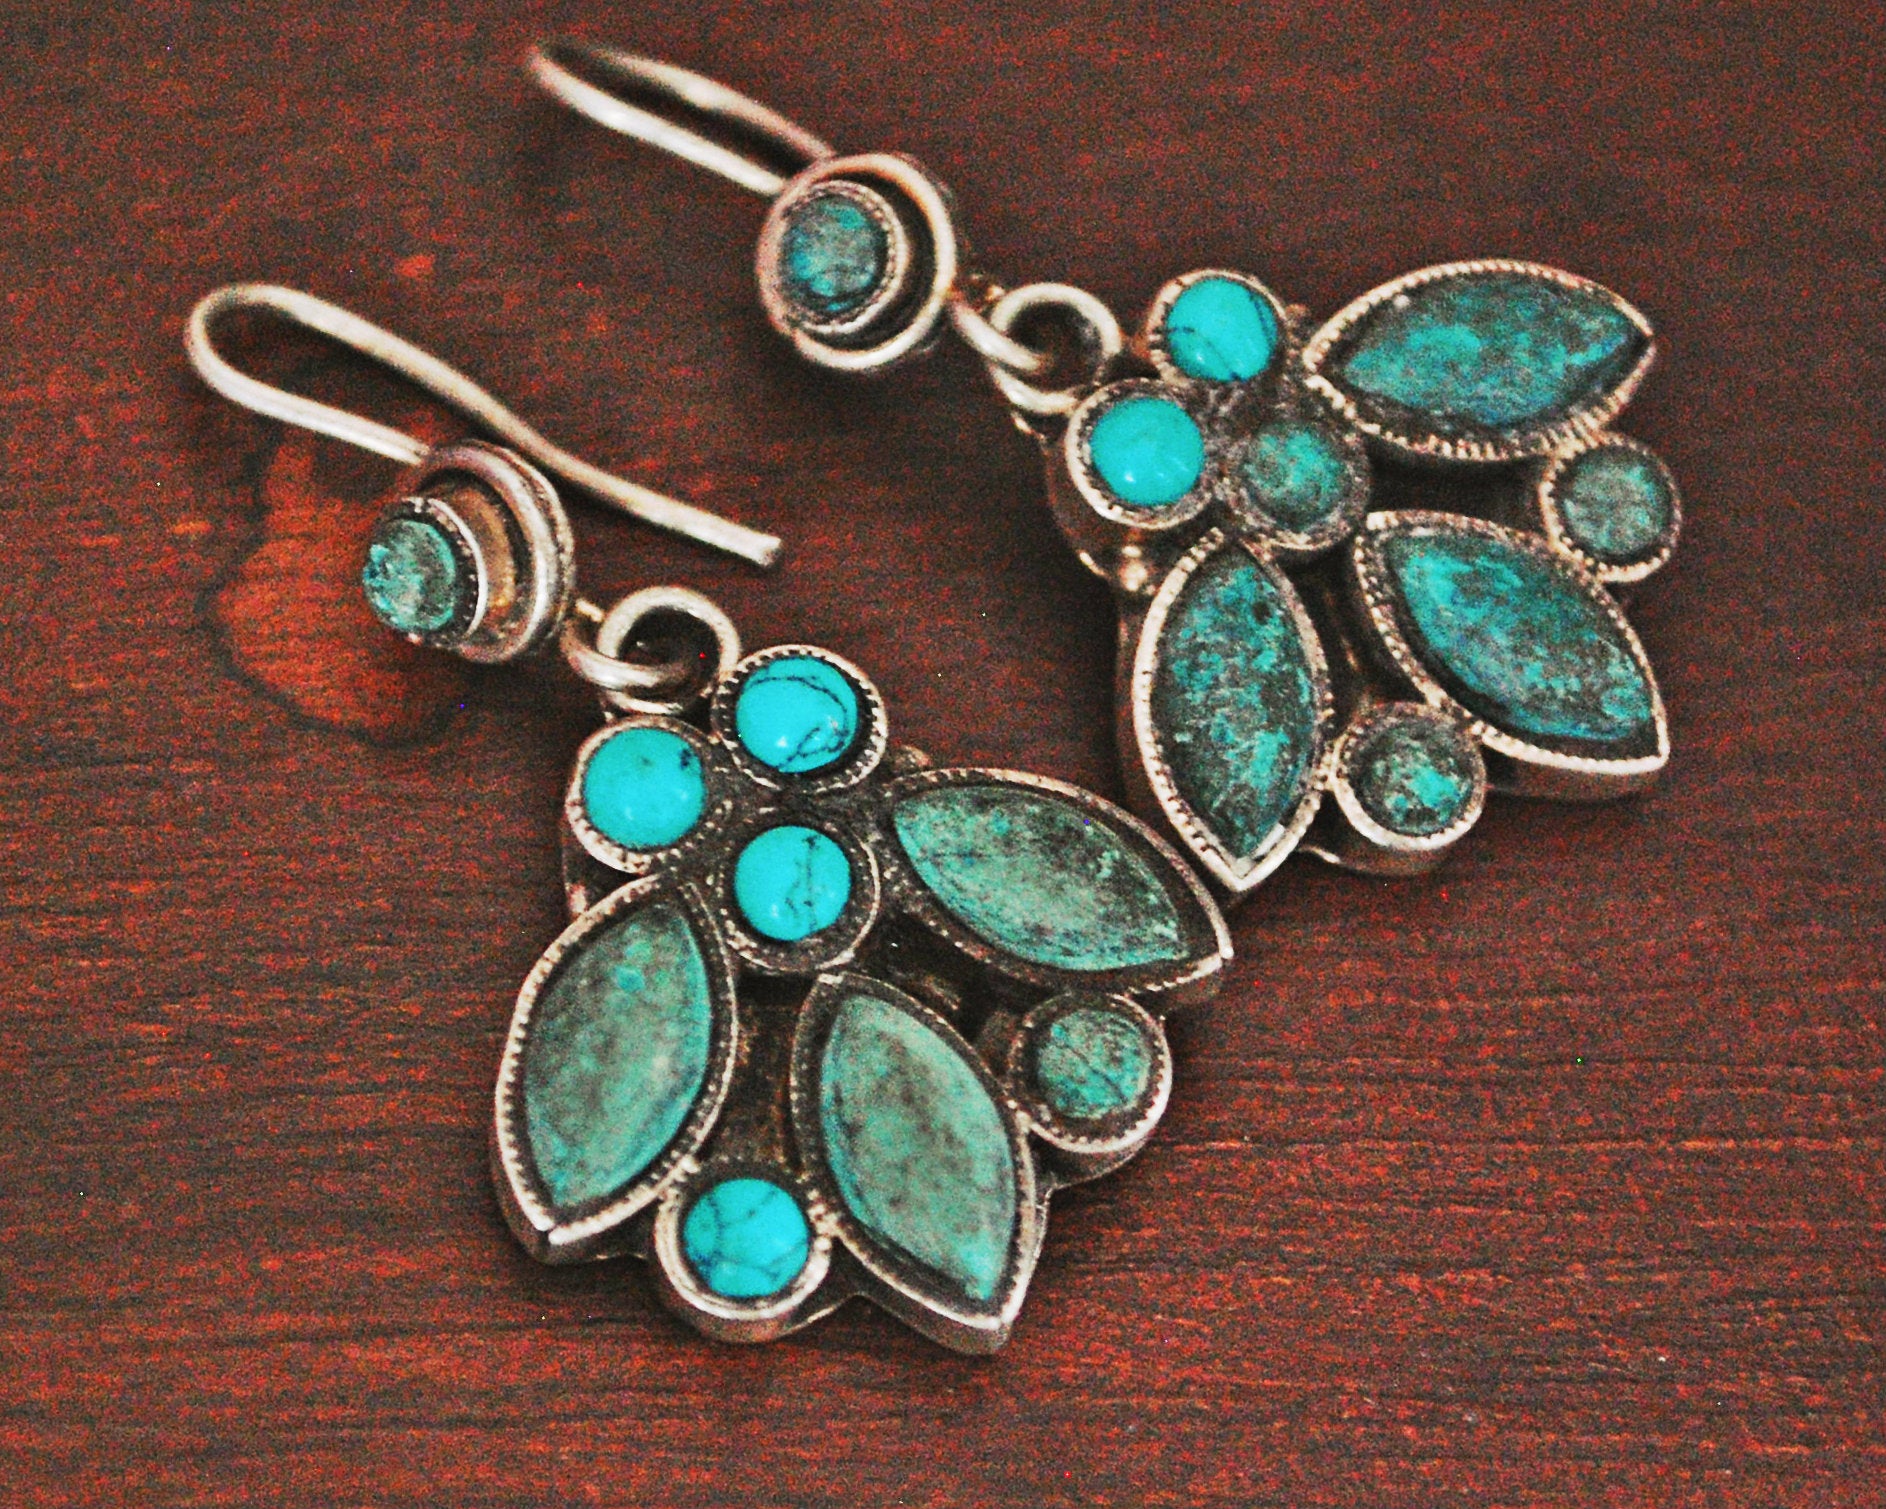 Turquoise Earrings from India